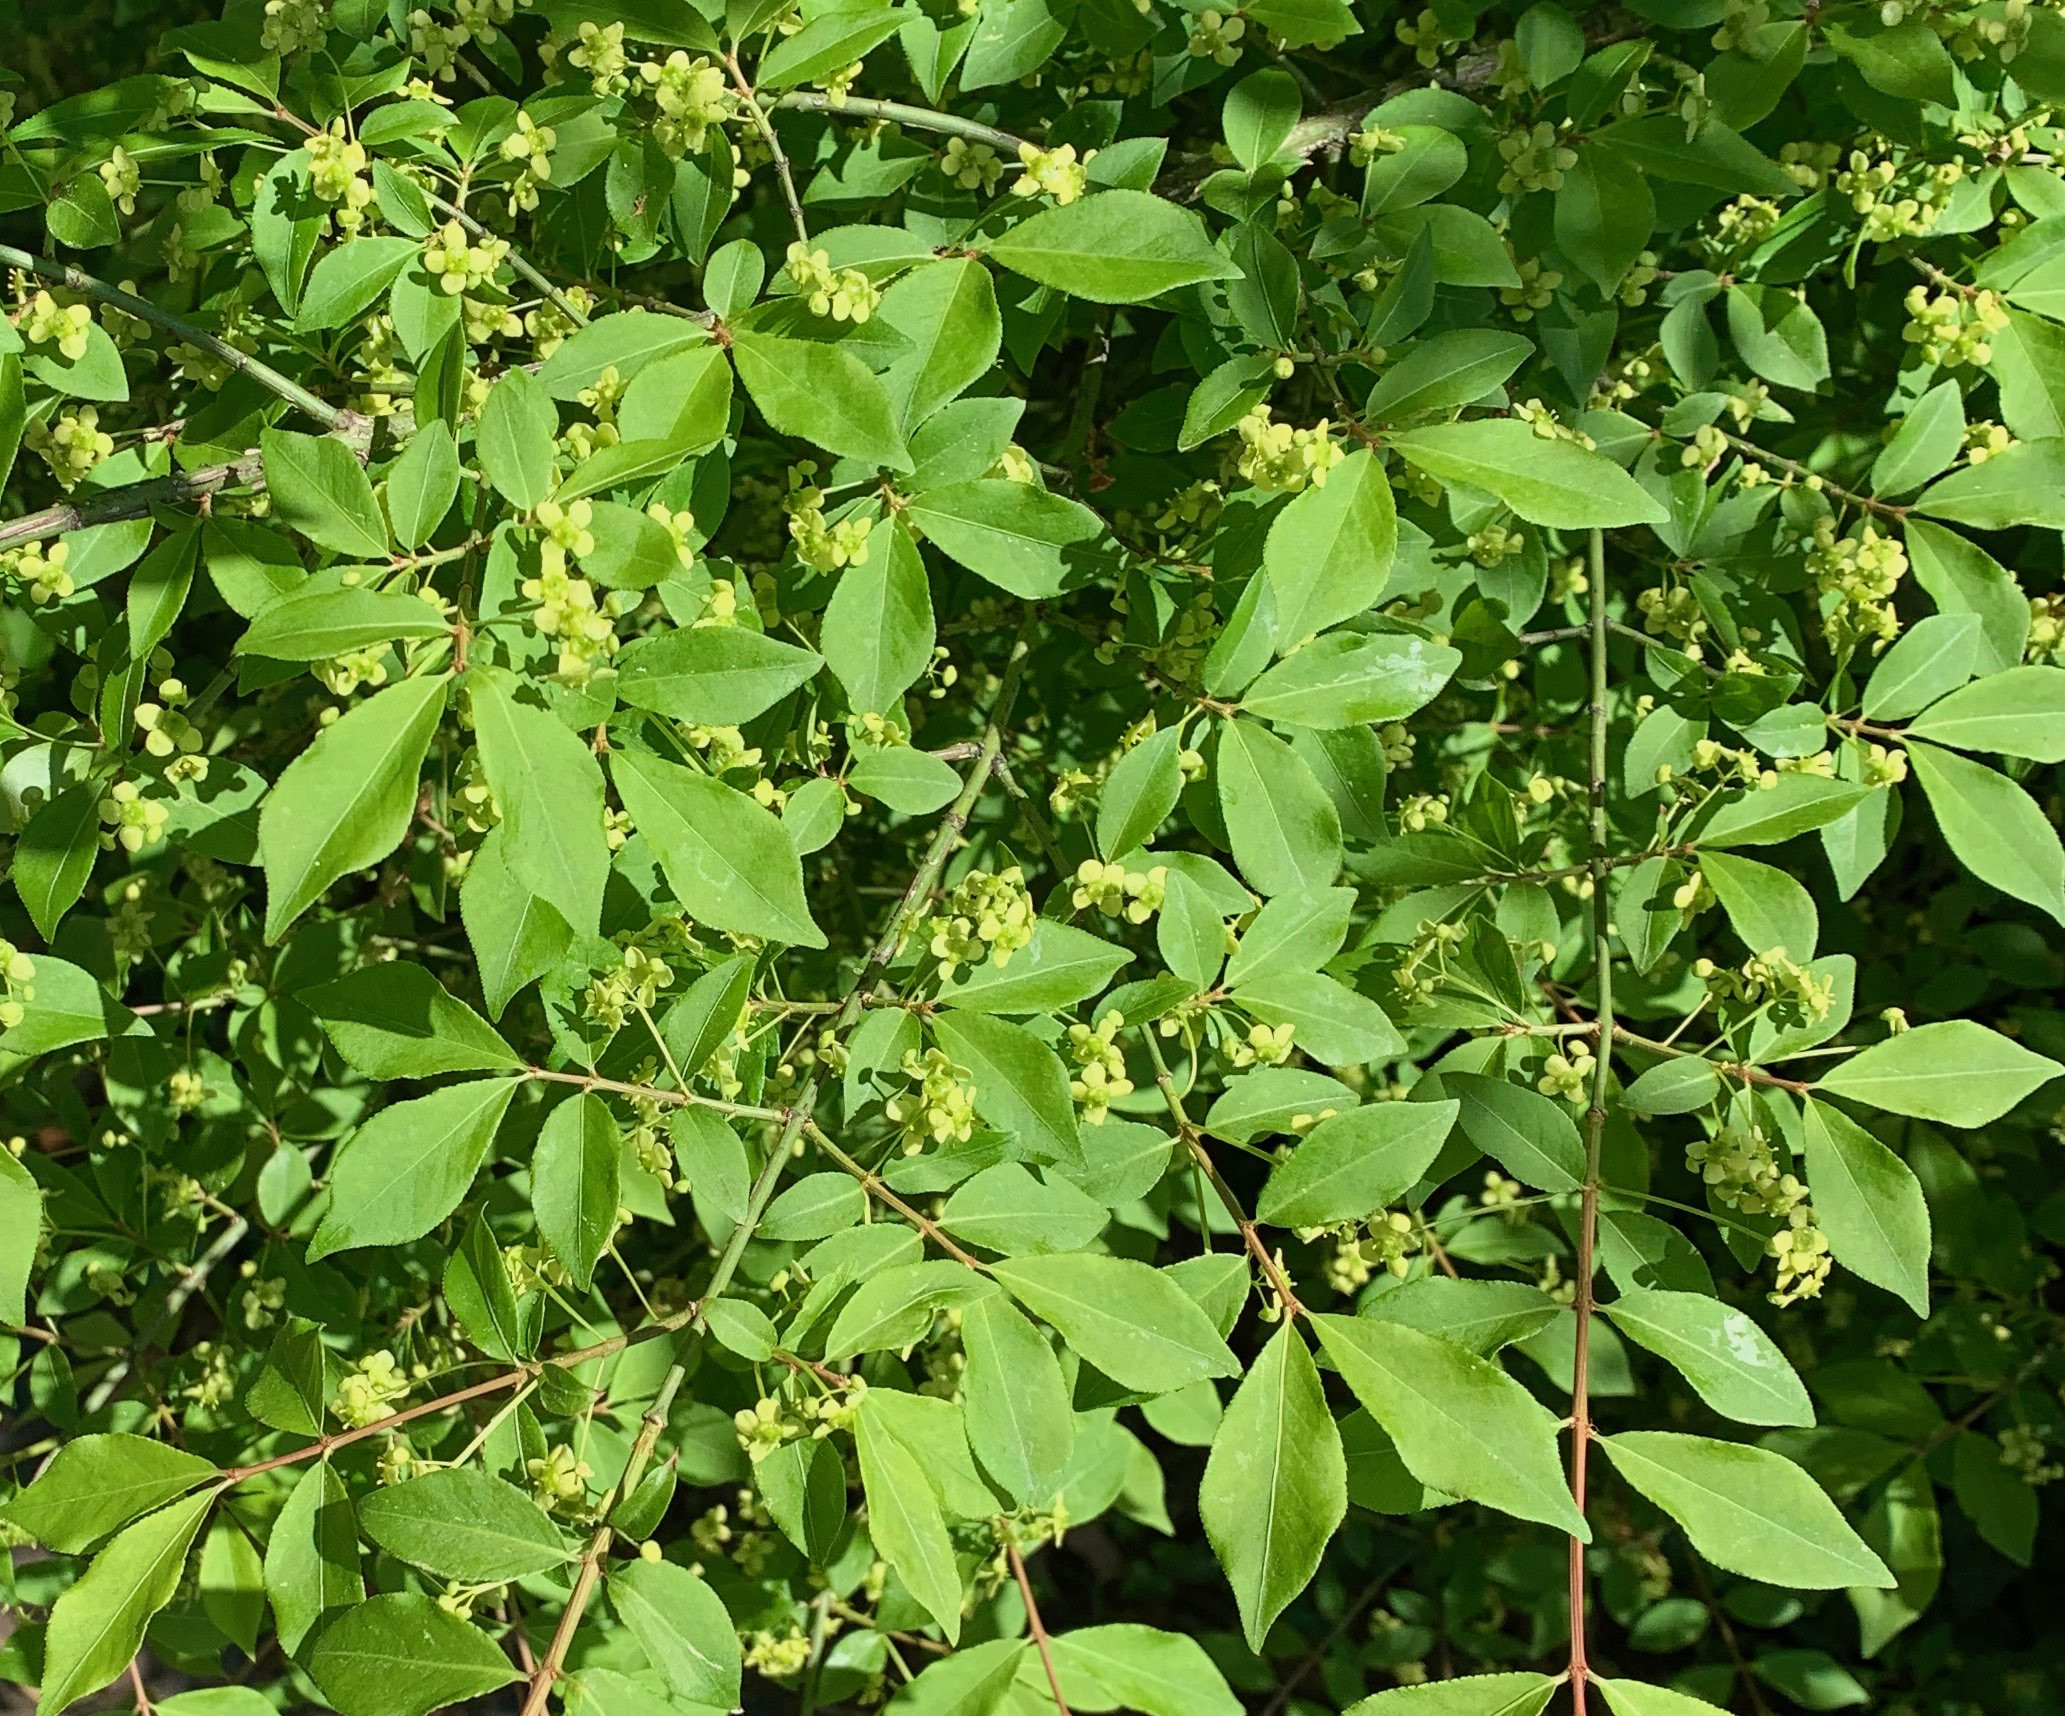 The Scientific Name is Euonymus alatus. You will likely hear them called Winged Euonymus, Burning Bush, Winged Wahoo. This picture shows the Opposite, deciduous leaves with sessile (or nearly so), finely toothed leaves. The inconspicuous 4-petaled flowers are pale greenish-yellow. Older twigs and branches have corky 